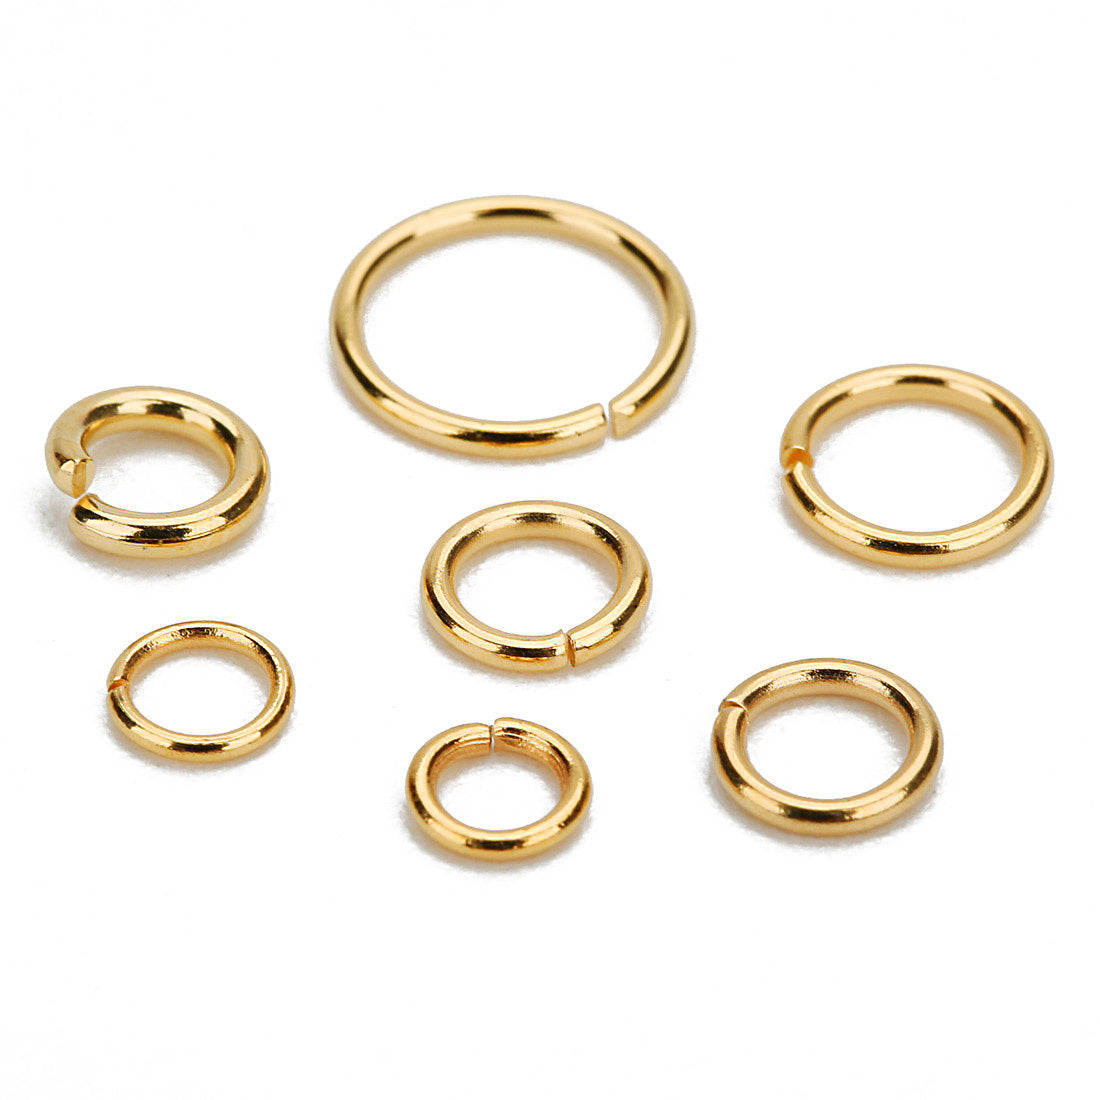 100 Gold plated stainless steel jump rings